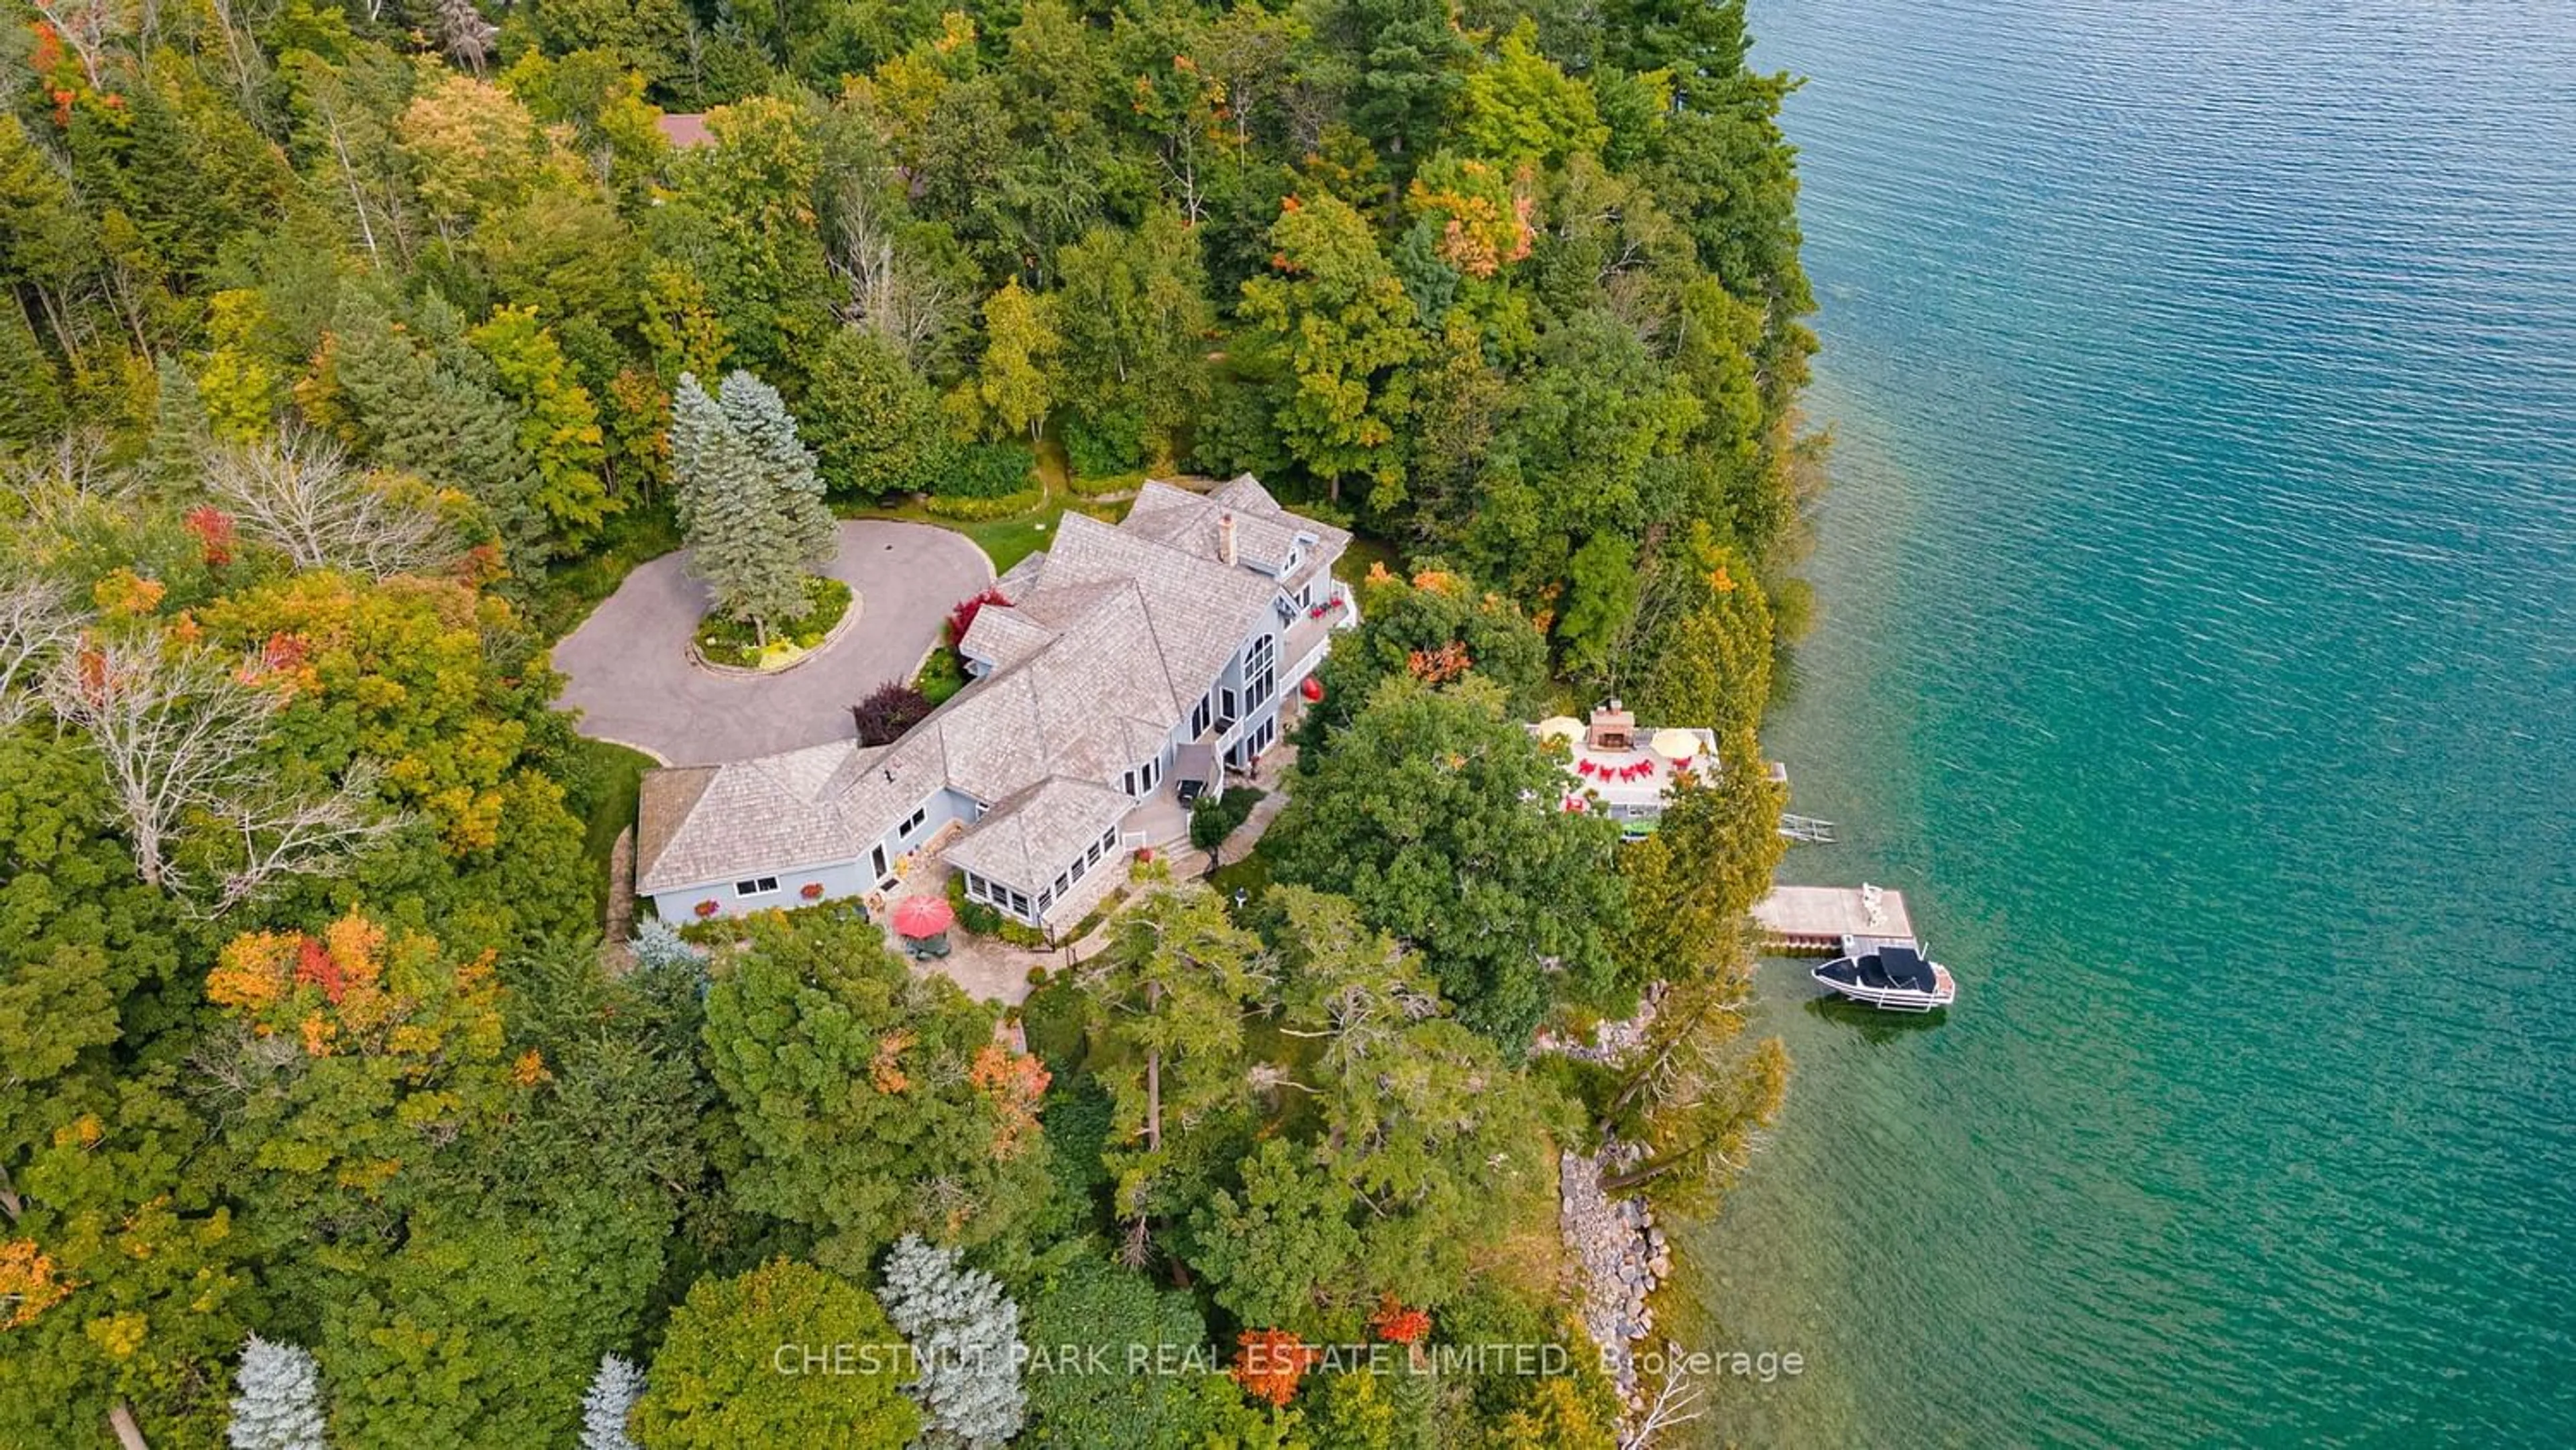 Lakeview for 153 Bay St, Oro-Medonte Ontario L0L 2L0